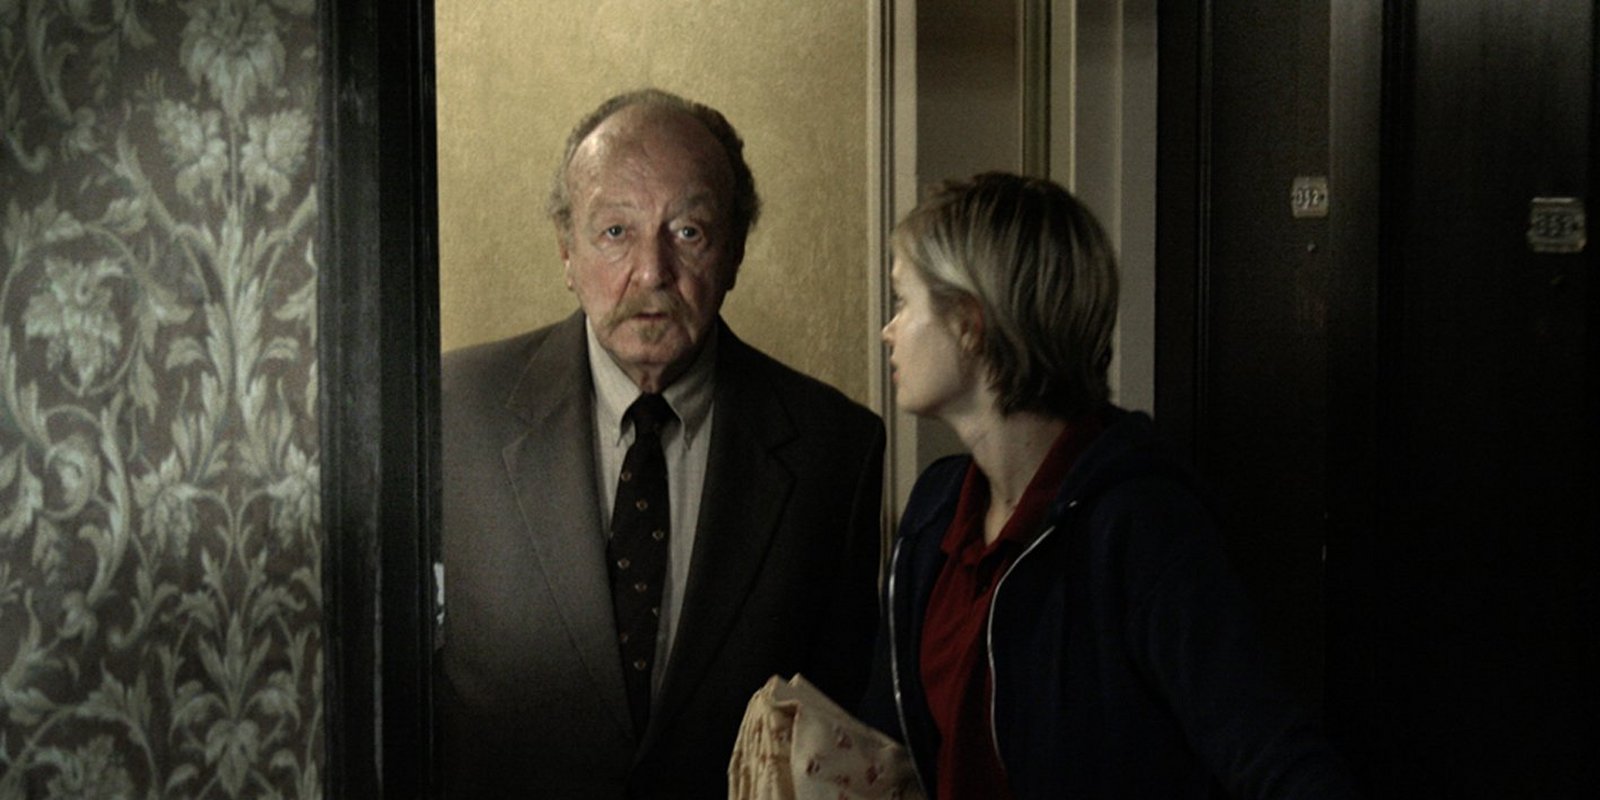 The Innkeepers